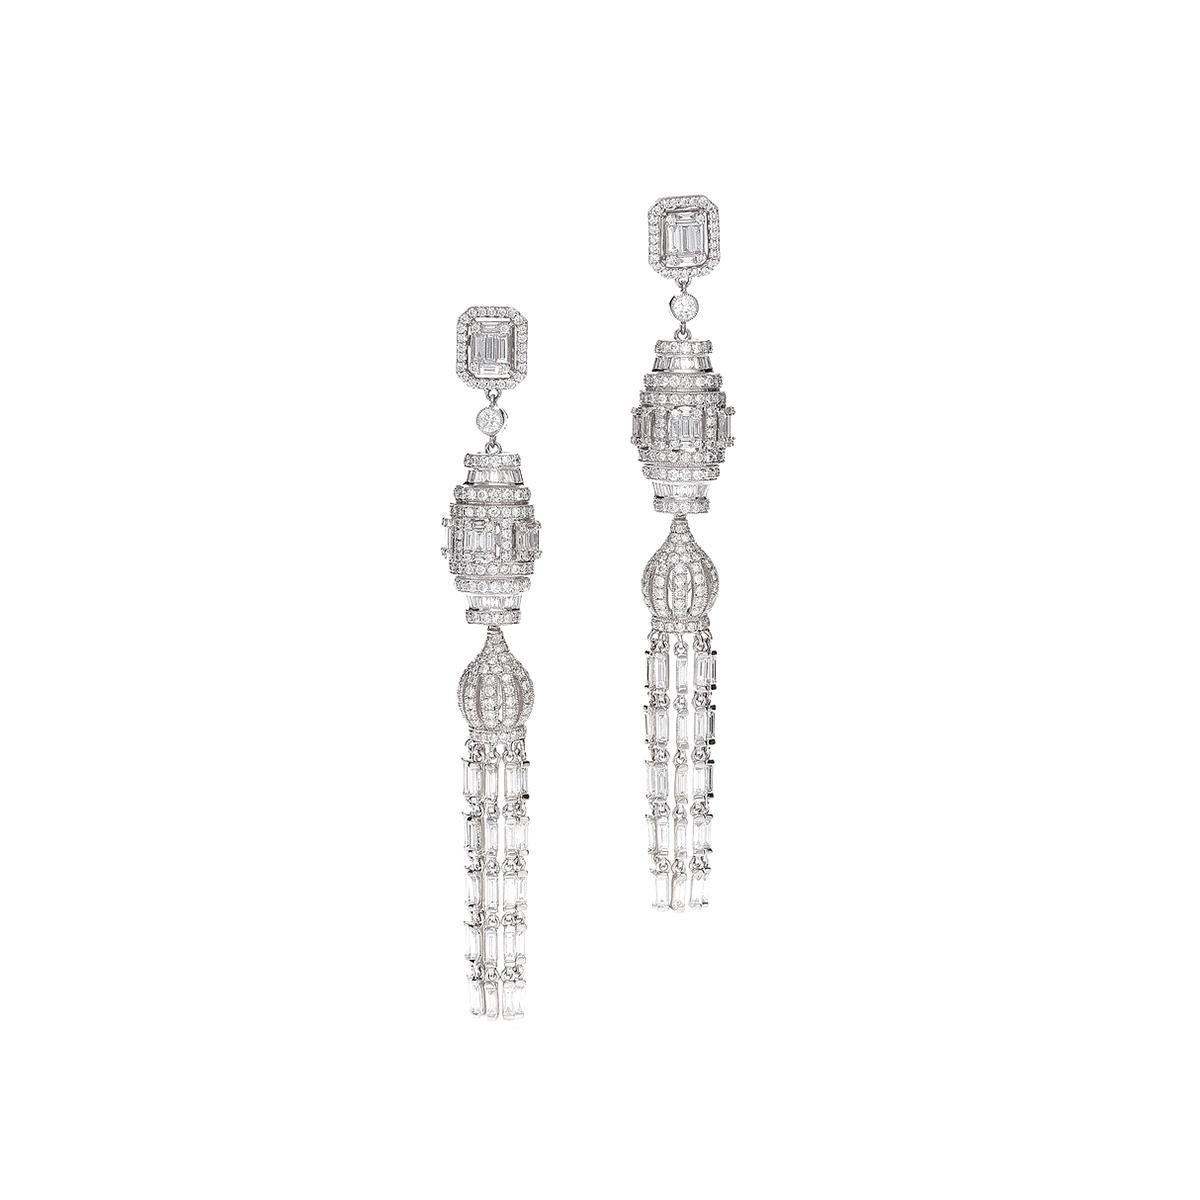 Earrings in 18kt white gold set with 374 diamonds 2.83 cts and 134  baguette cut diamonds 3.31 cts